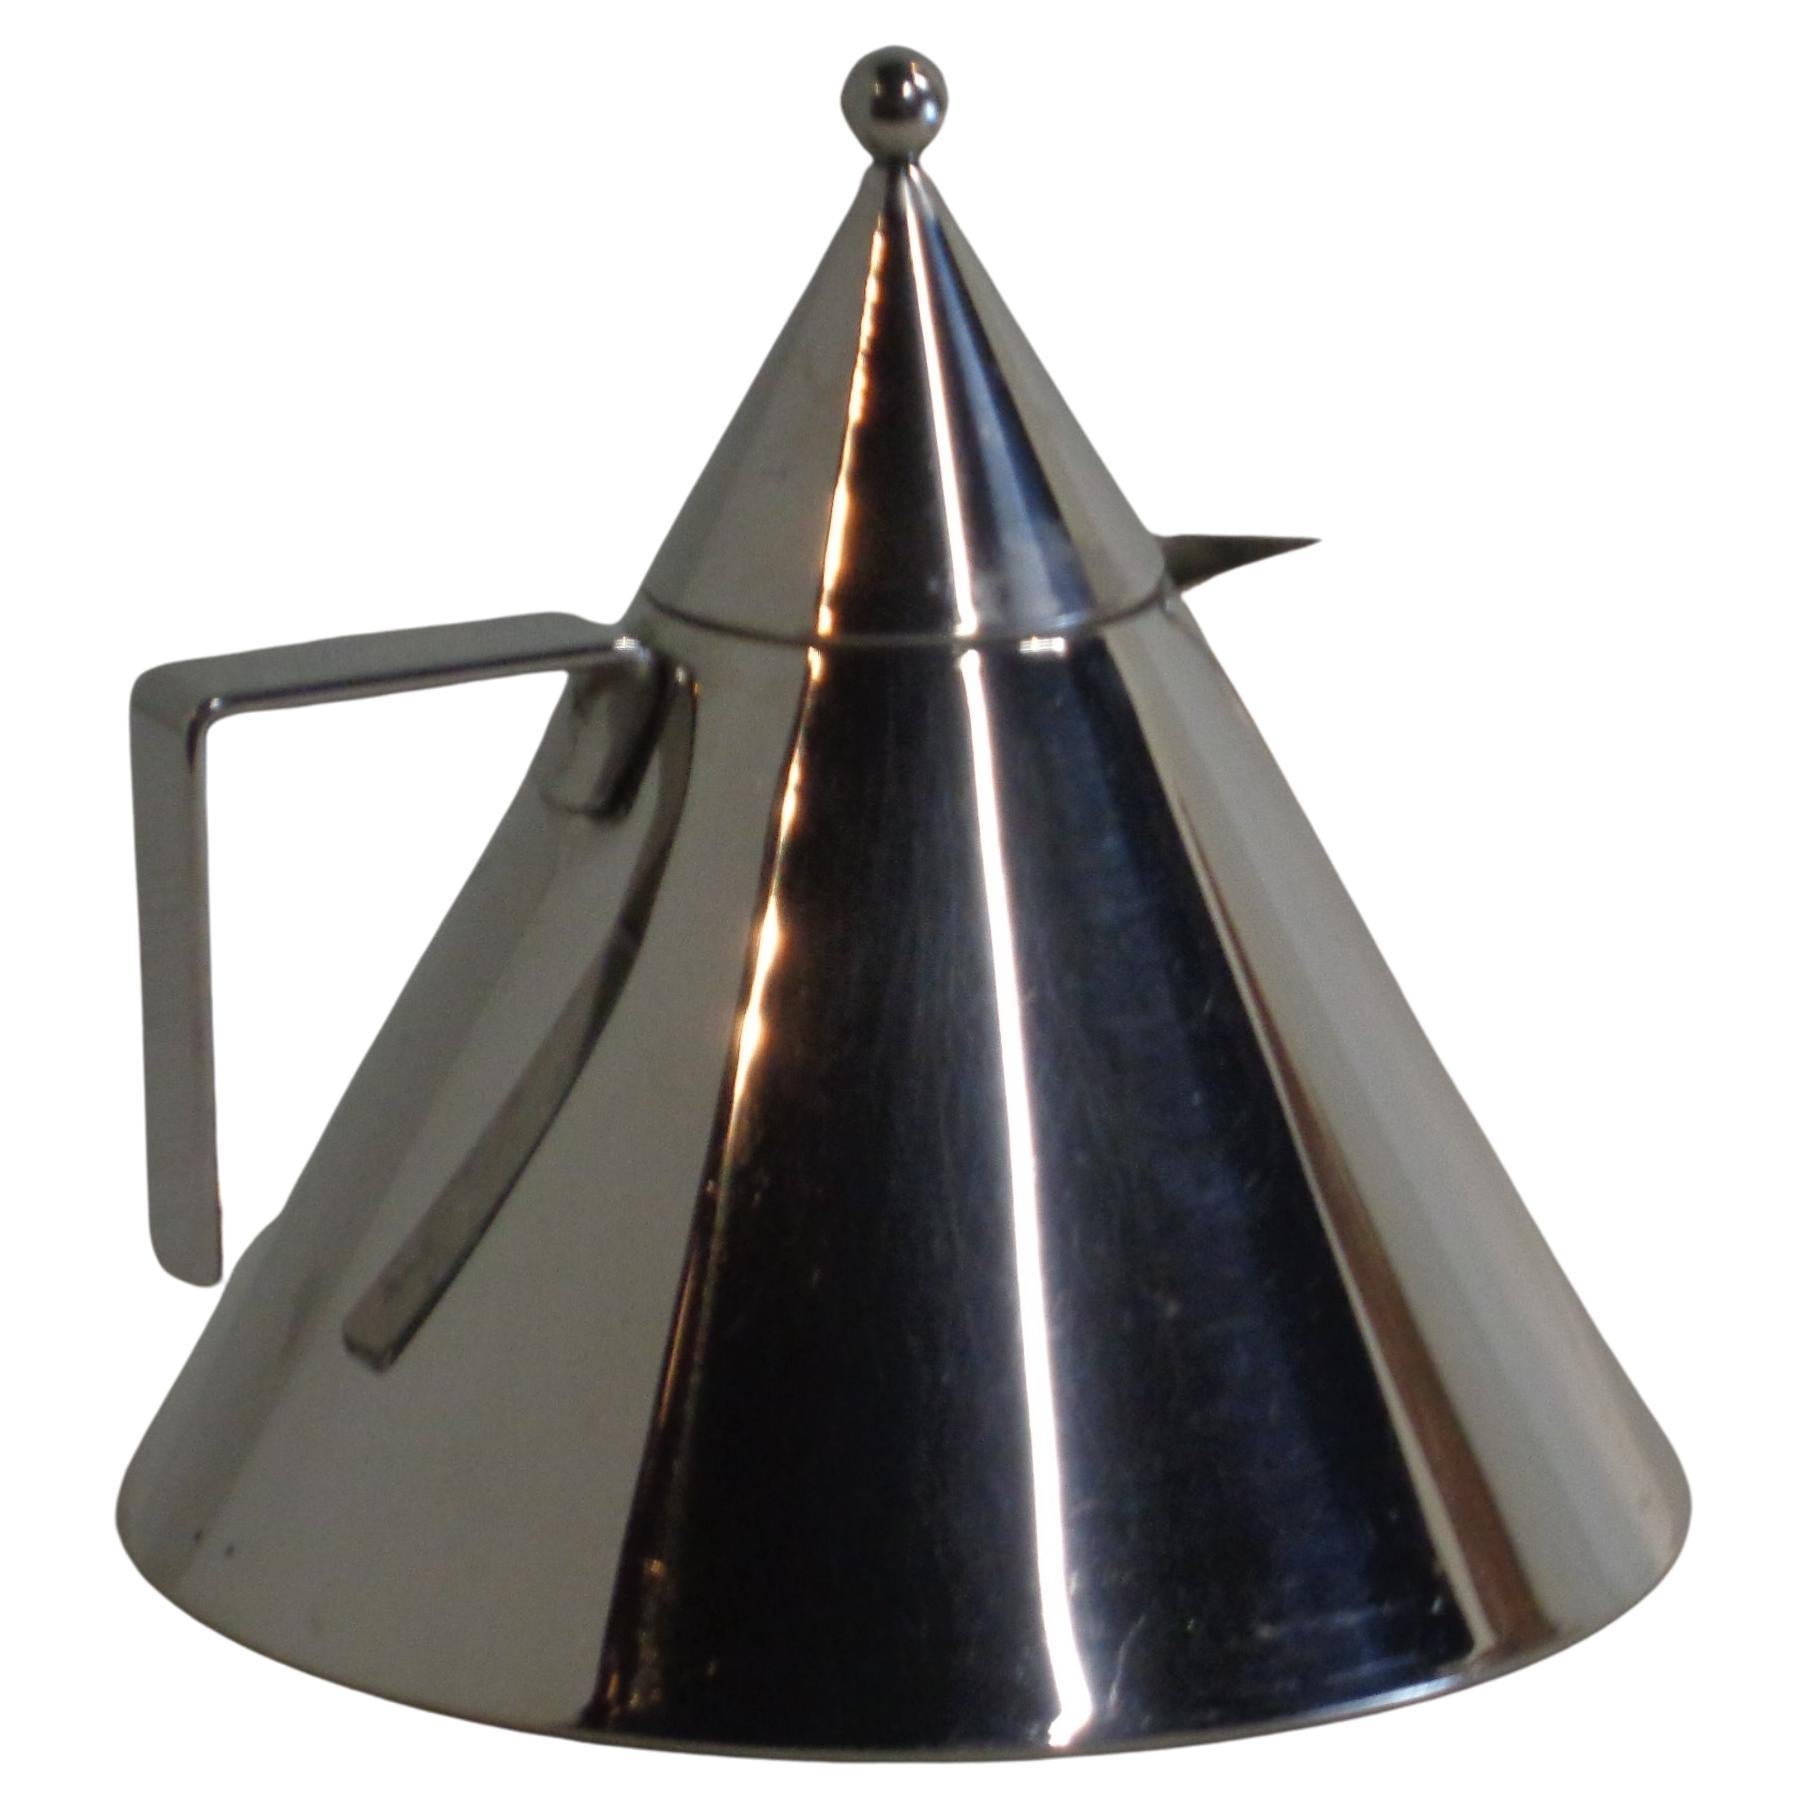 The Alessi Il Conico Water Kettle by Aldo Rossi for Alessi, Italy. Made of polished stainless steel - 1986 design. Signed on underside. Early vintage pre-owned example in nice condition. Look at all pictures and read condition report in comment